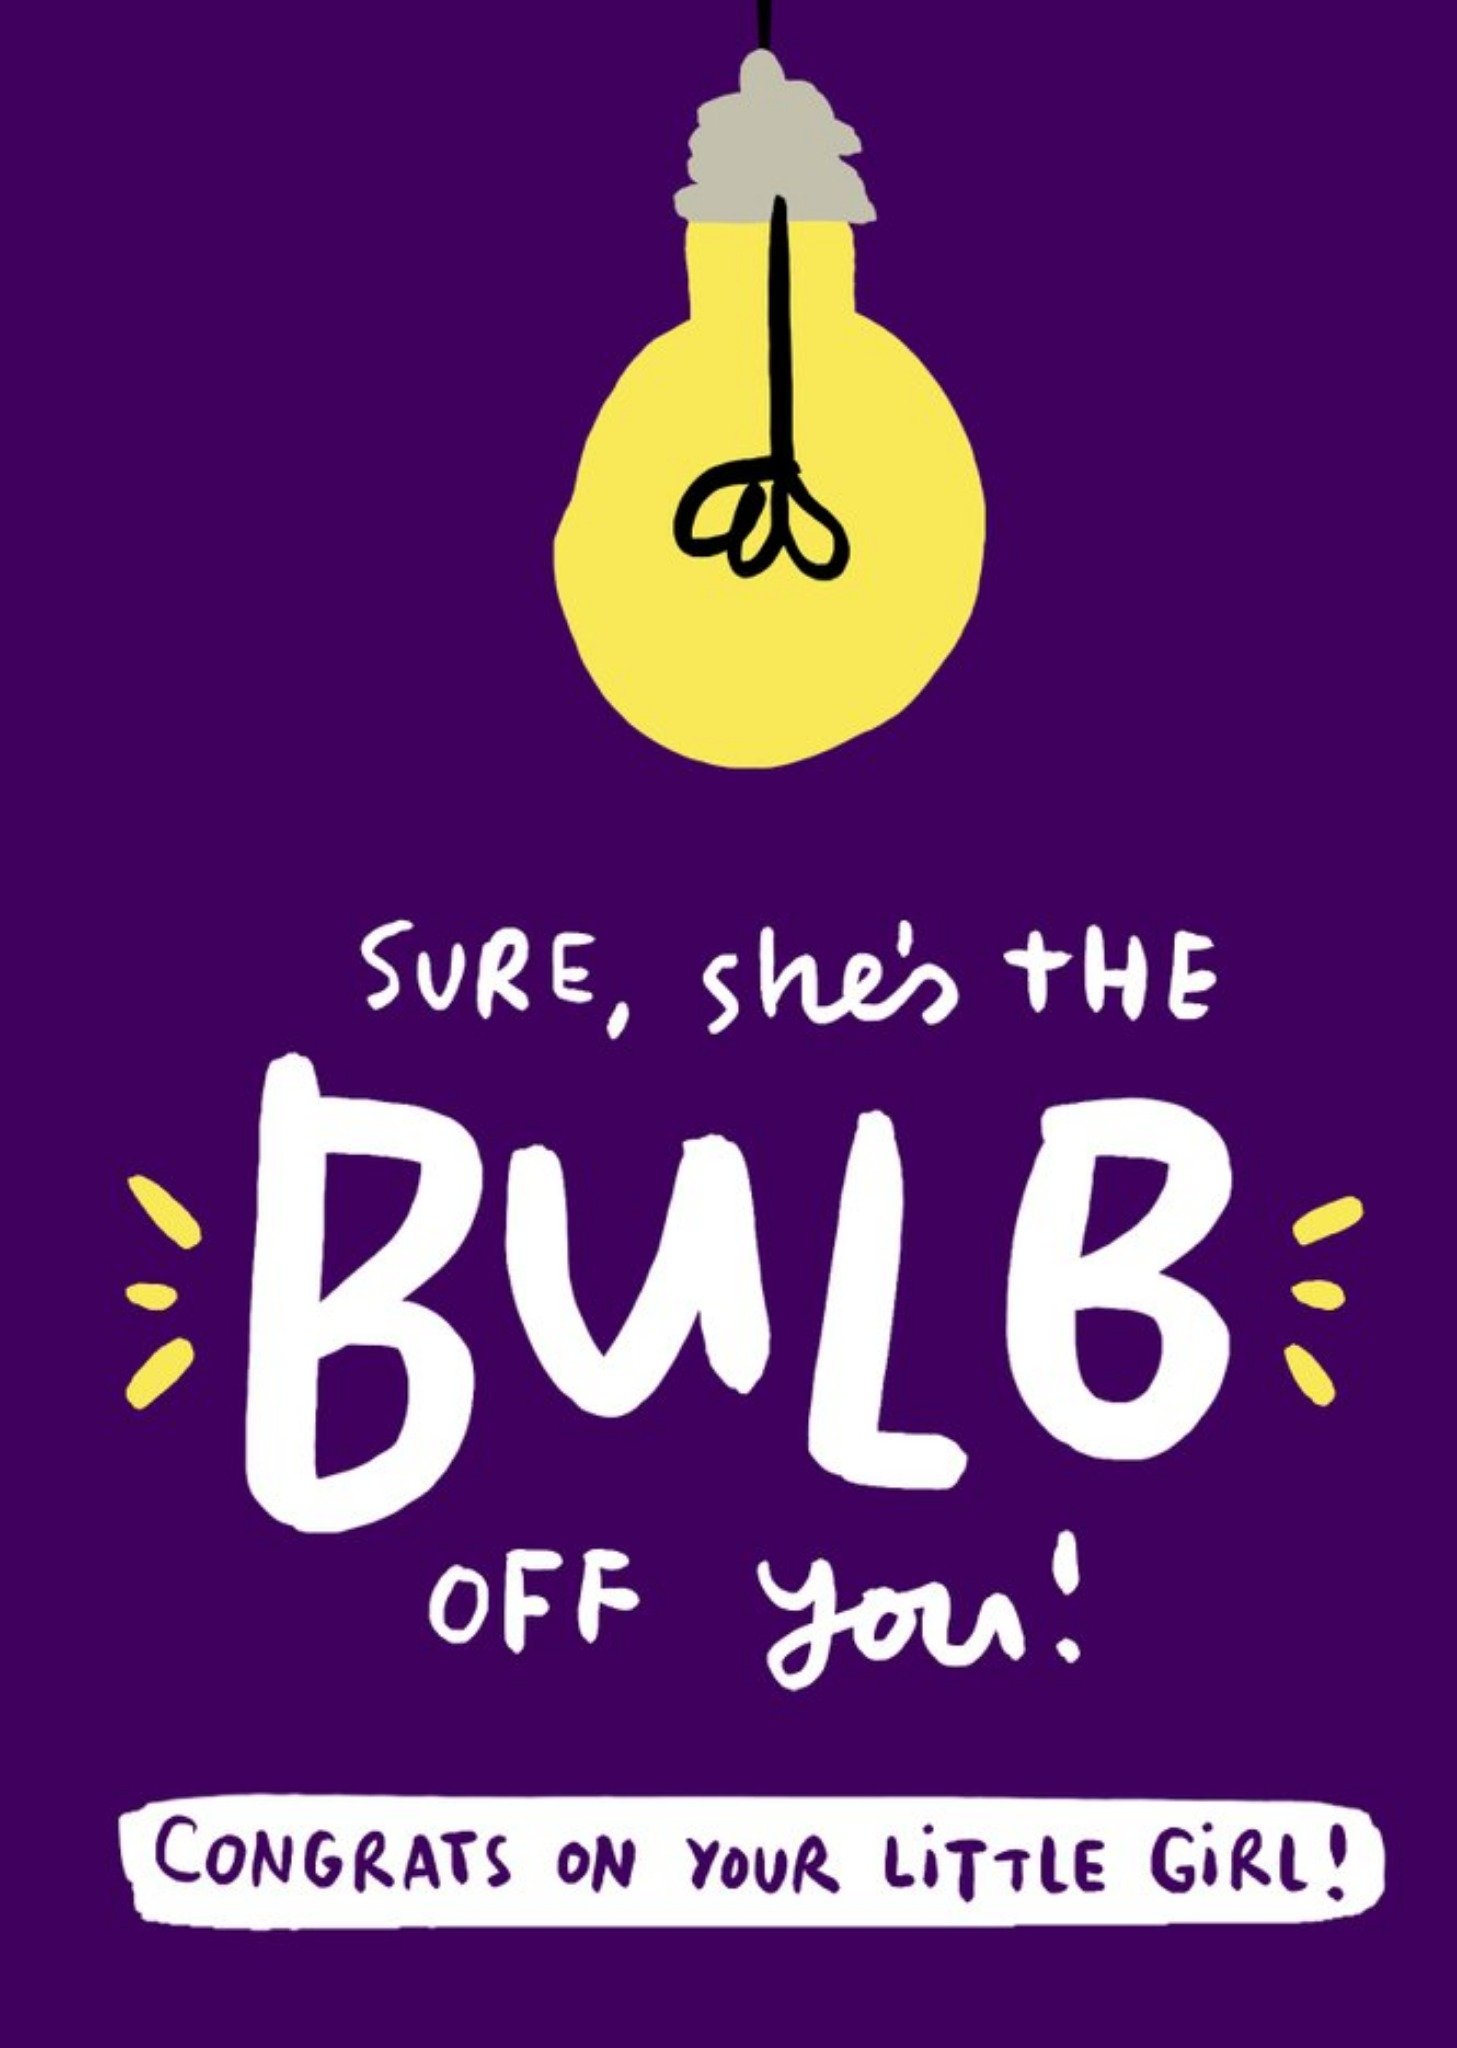 Moonpig Illustrated Bulb She's The Bulb You Congrats New Baby Card Ecard